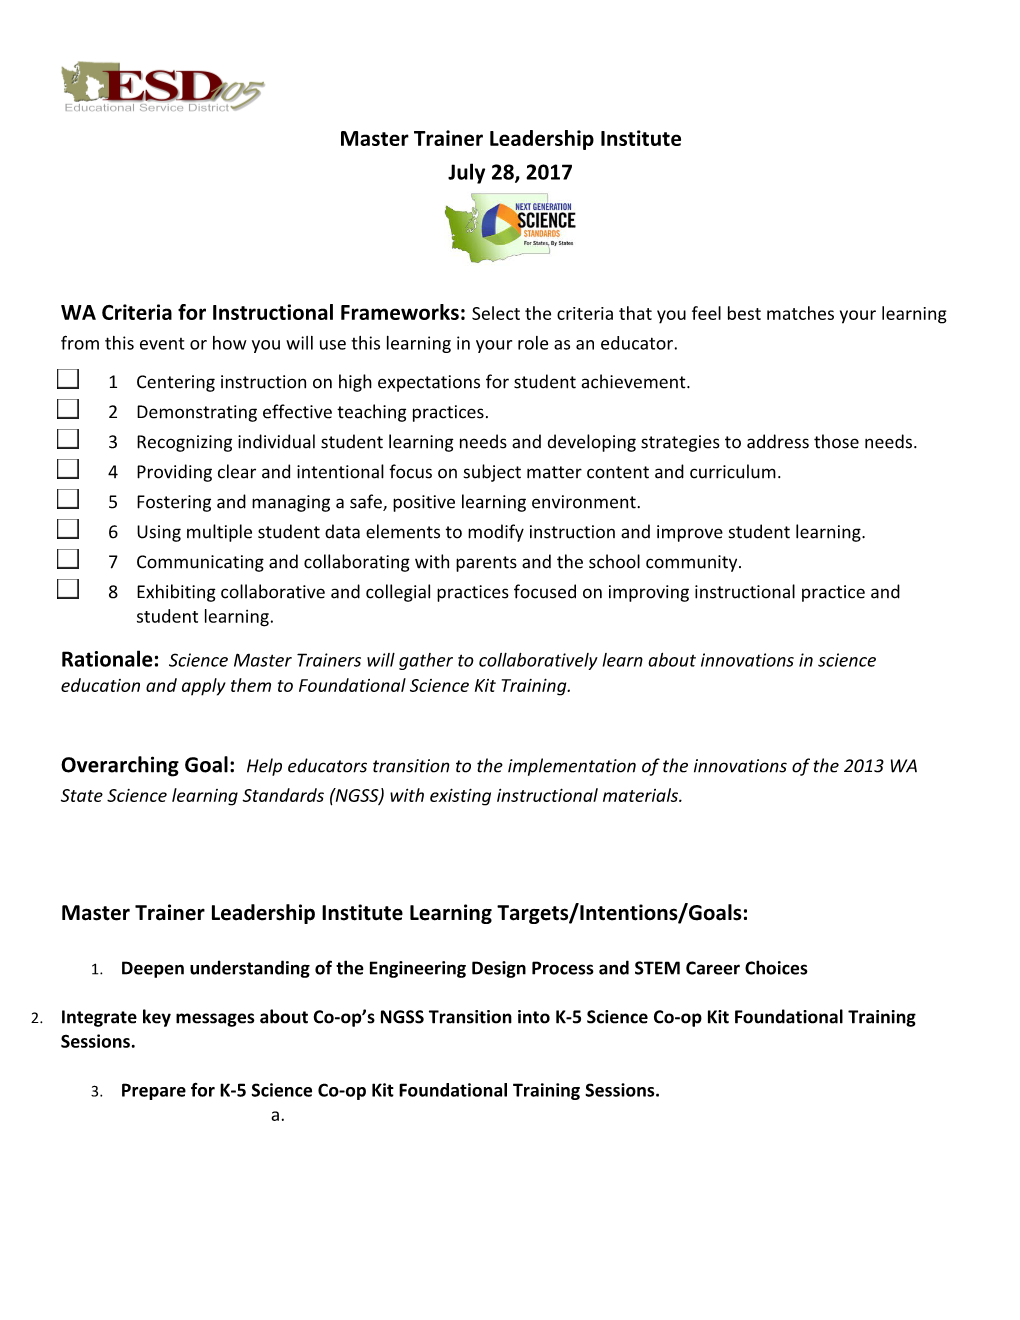 Master Trainer Leadership Institute Learning Targets/Intentions/Goals